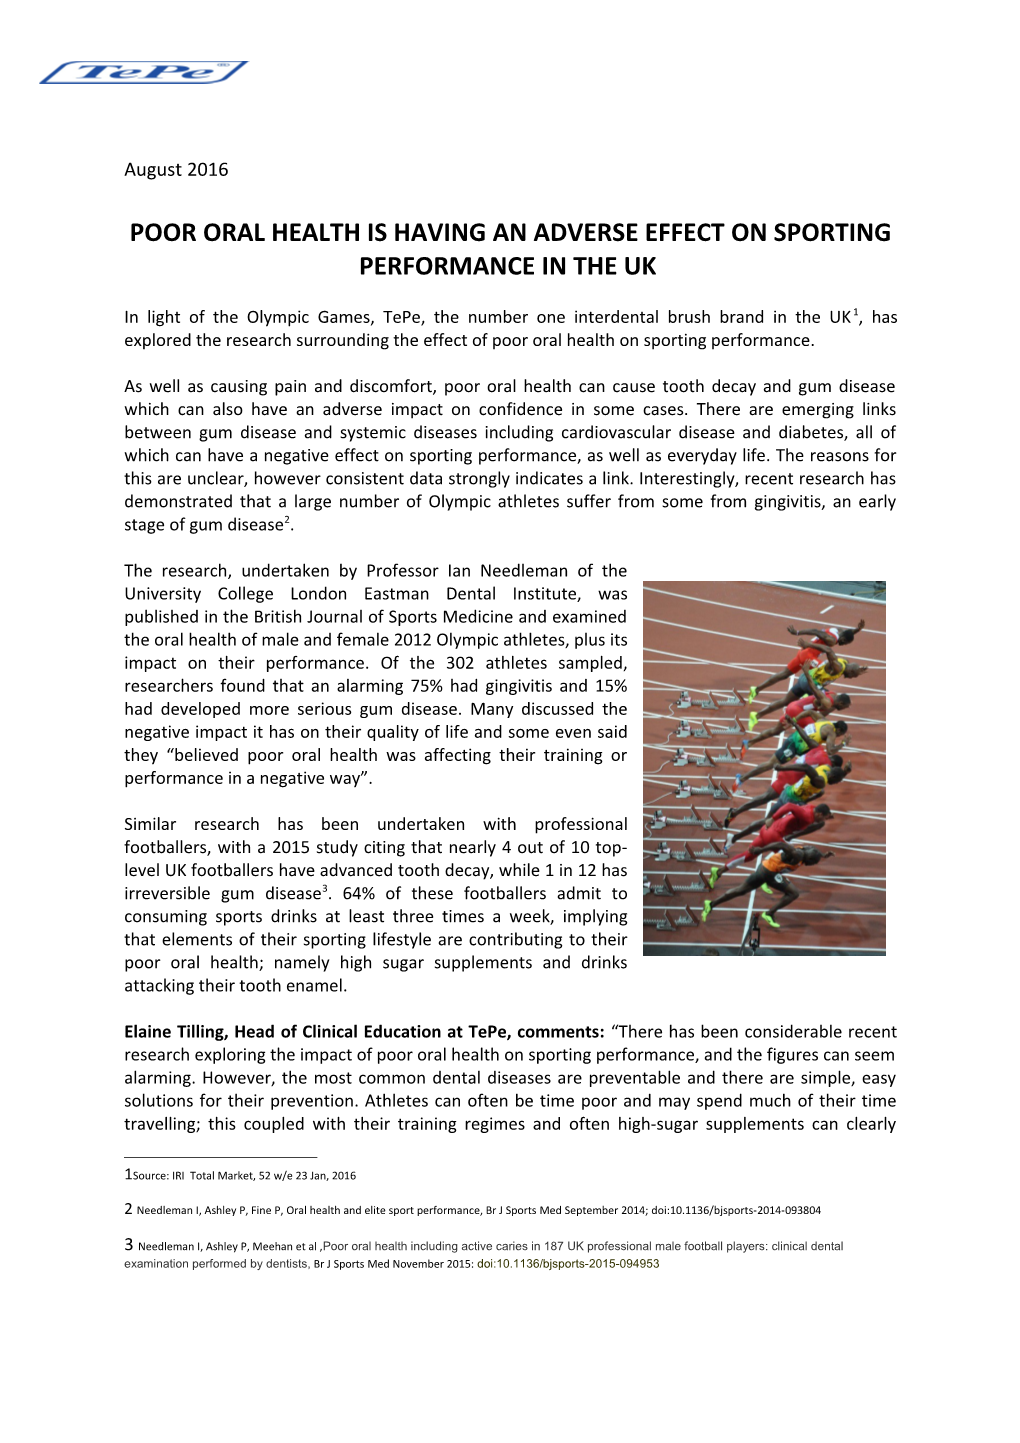 Poor Oral Health Is Having an Adverse Effect on Sporting Performance in the Uk